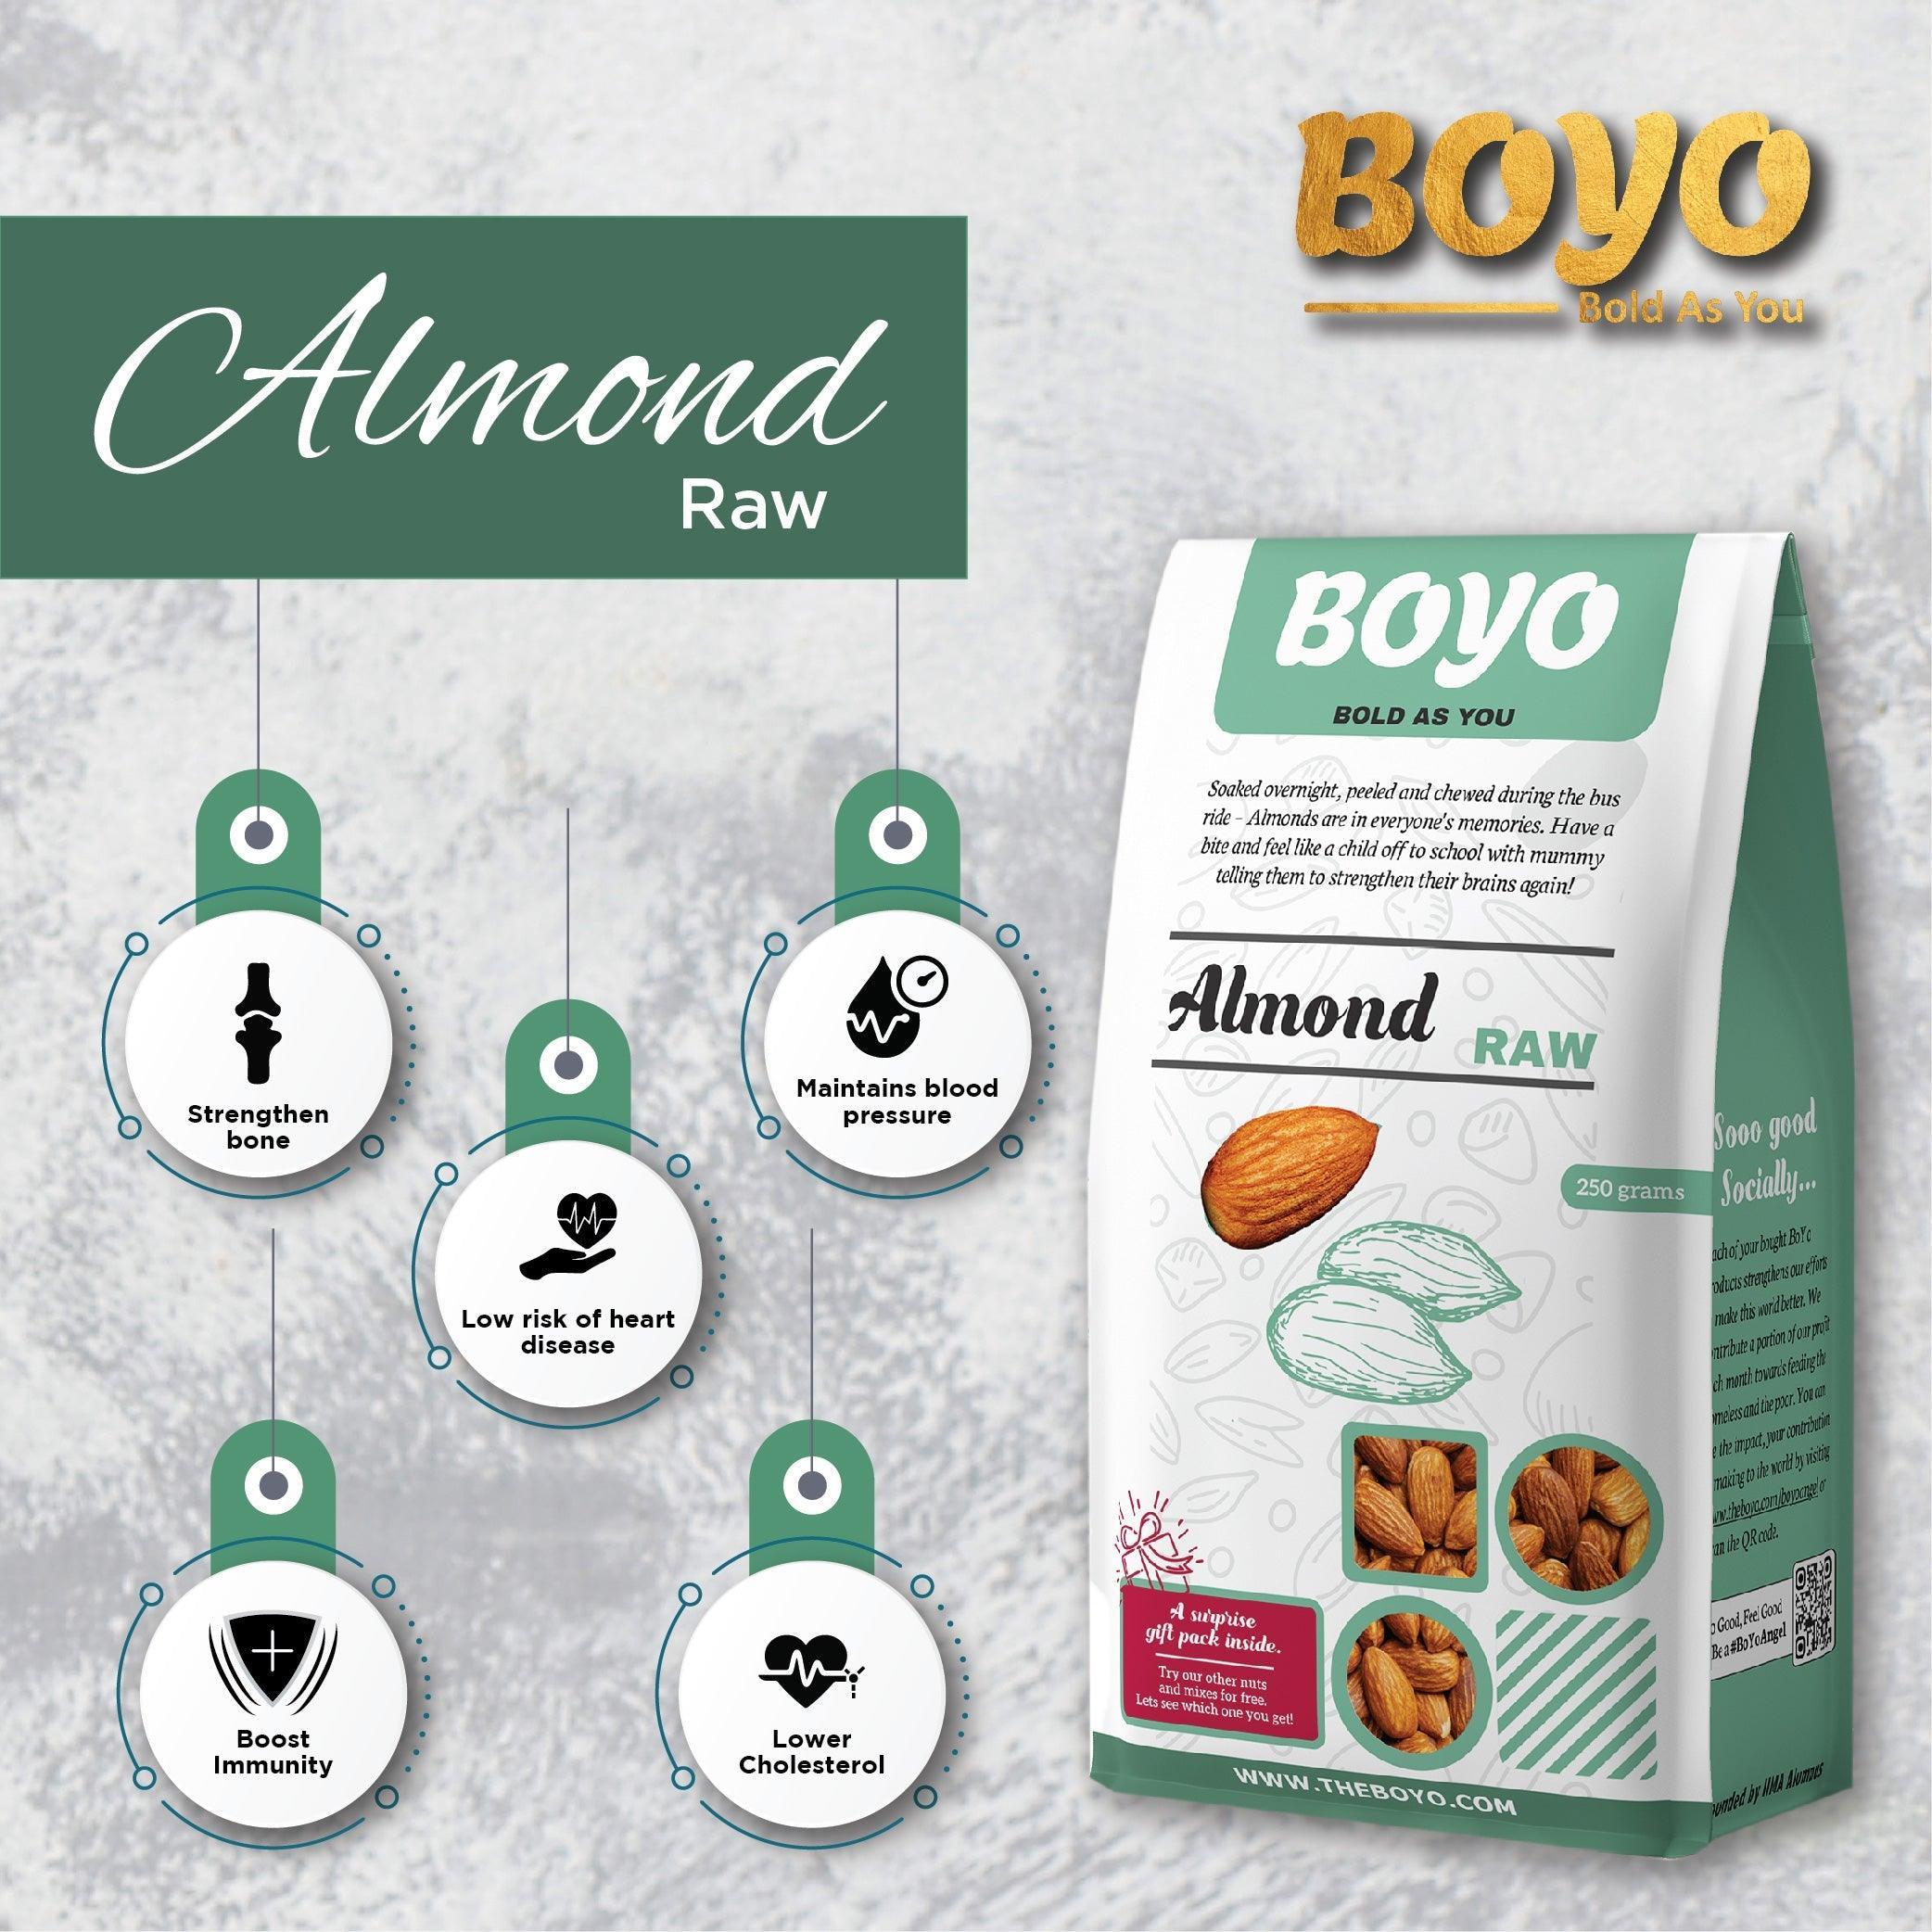 BOYO Almond, Walnut and Cashew Combo 750g - Premium Mixed Nuts Combo Pack - Healthy Snack Option